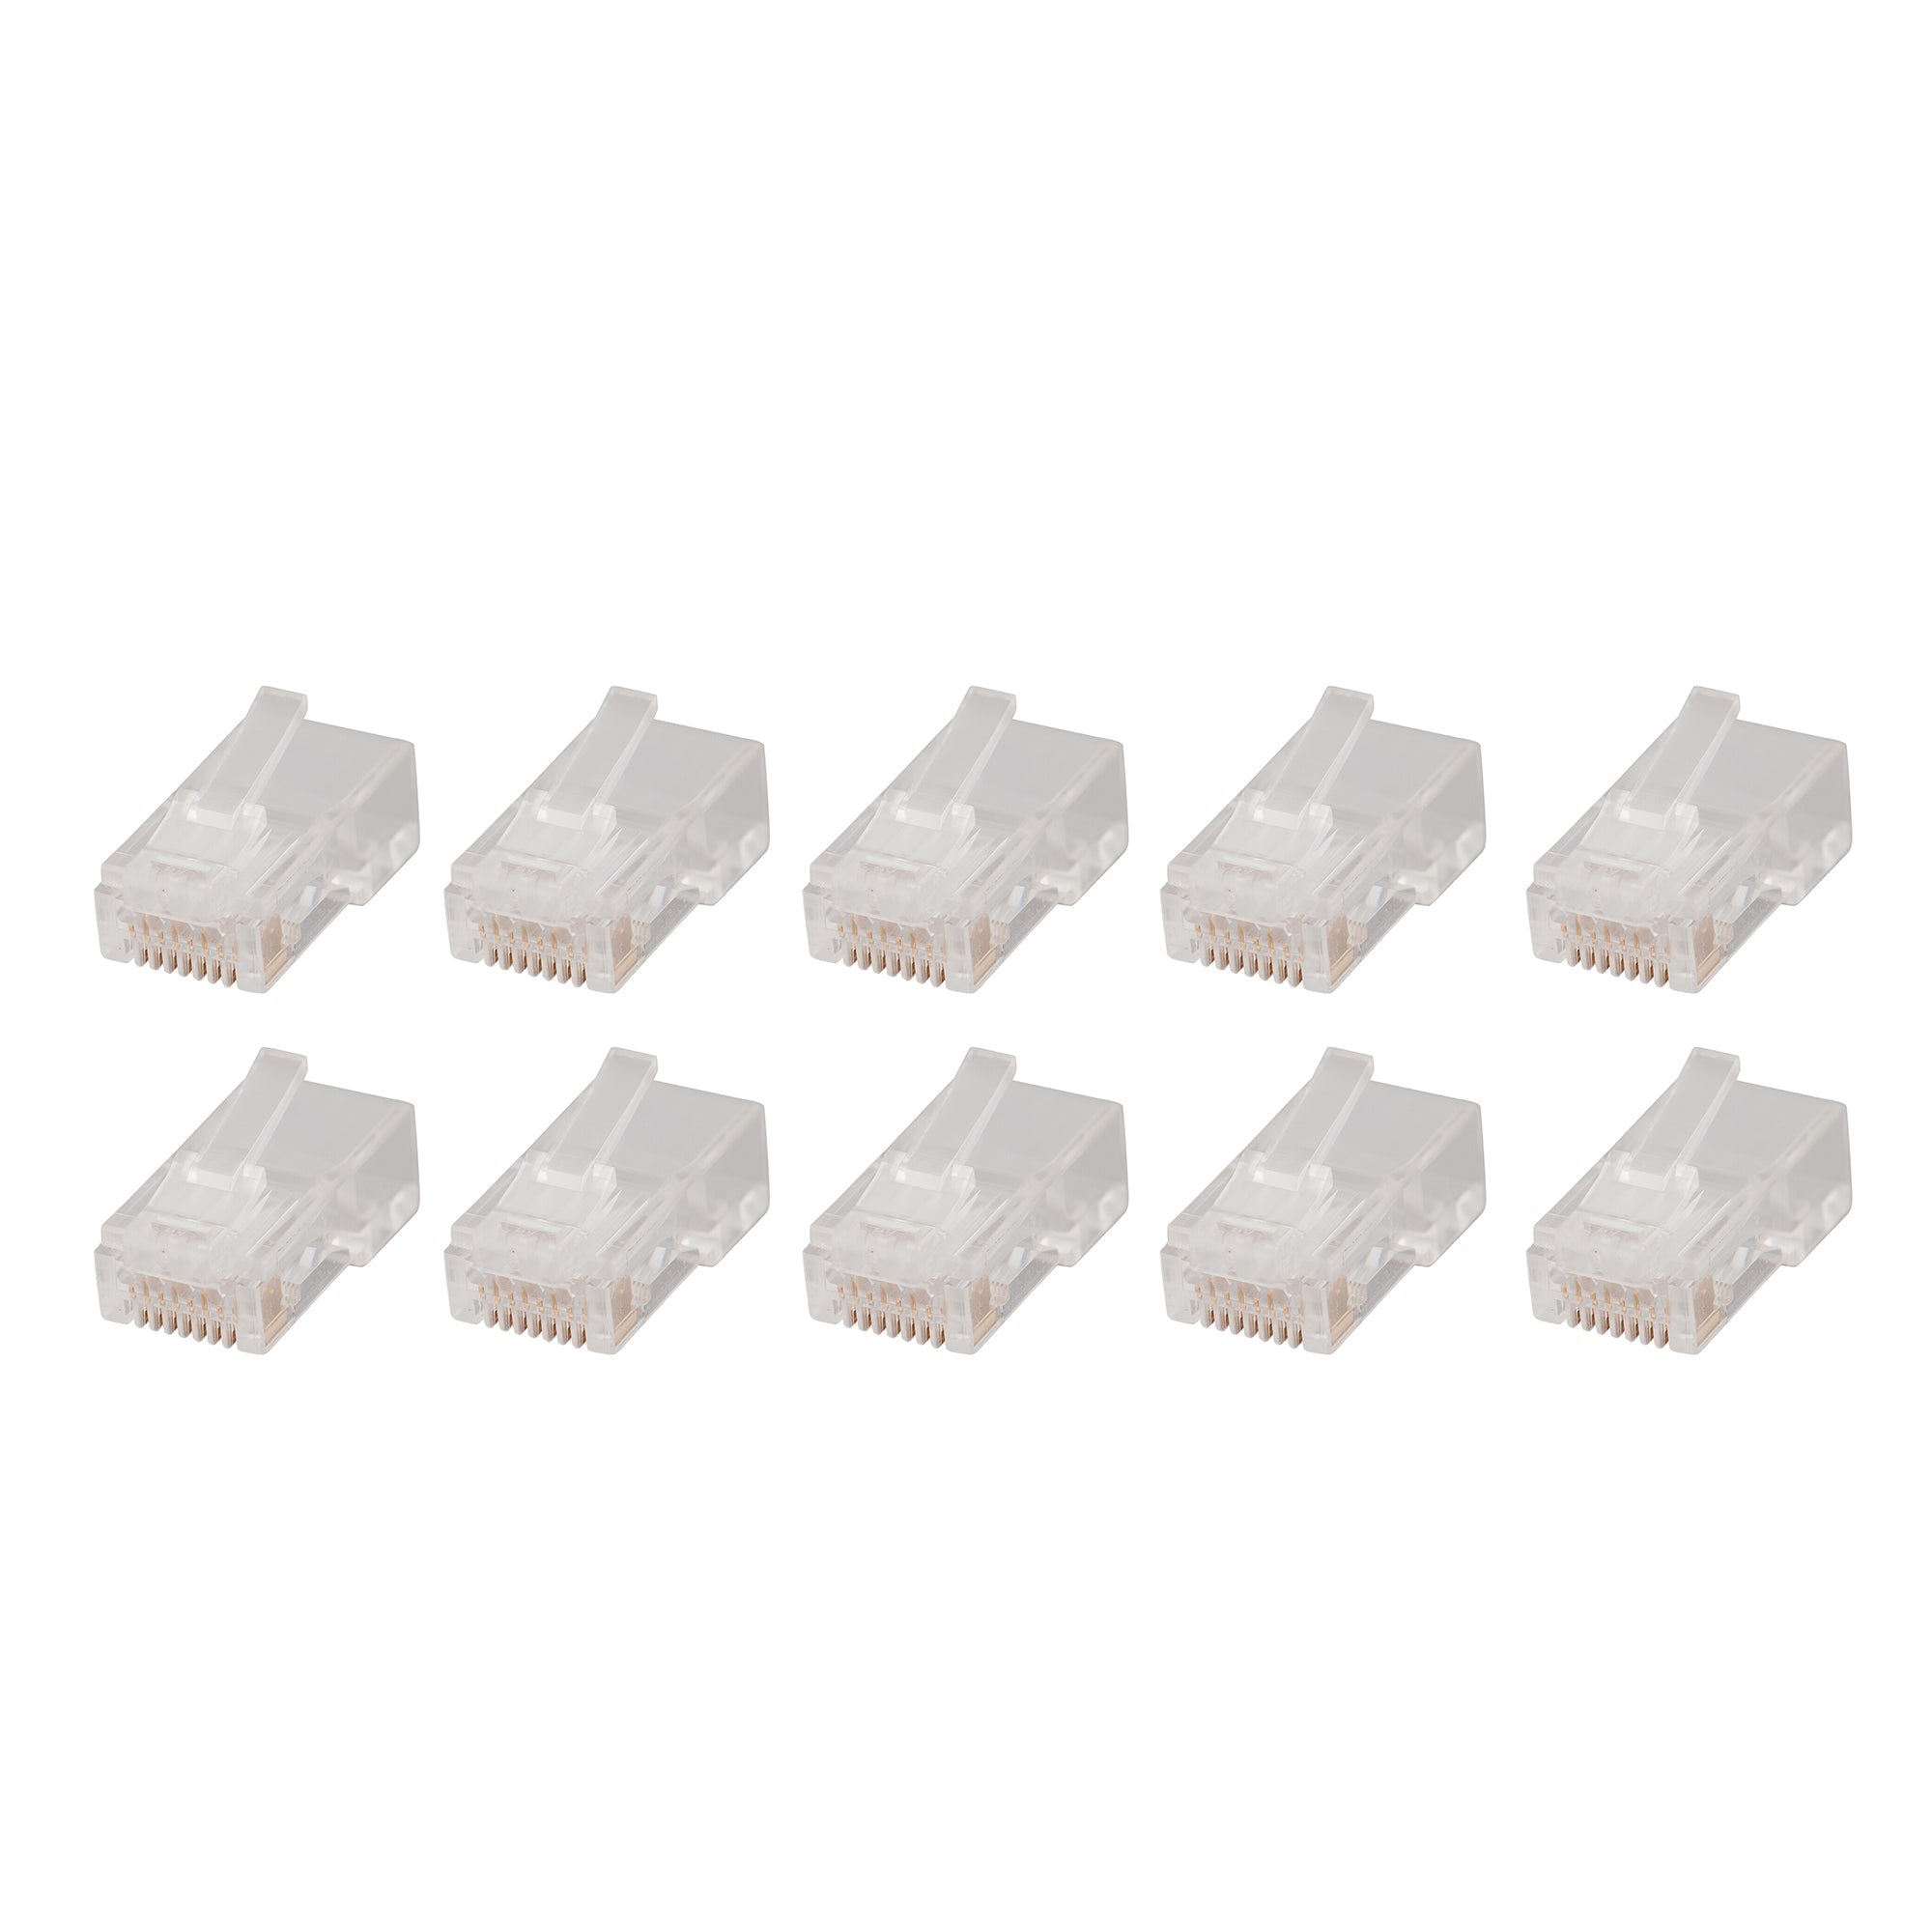 RJ45 Connectors For CAT5 Cable 10 Pack